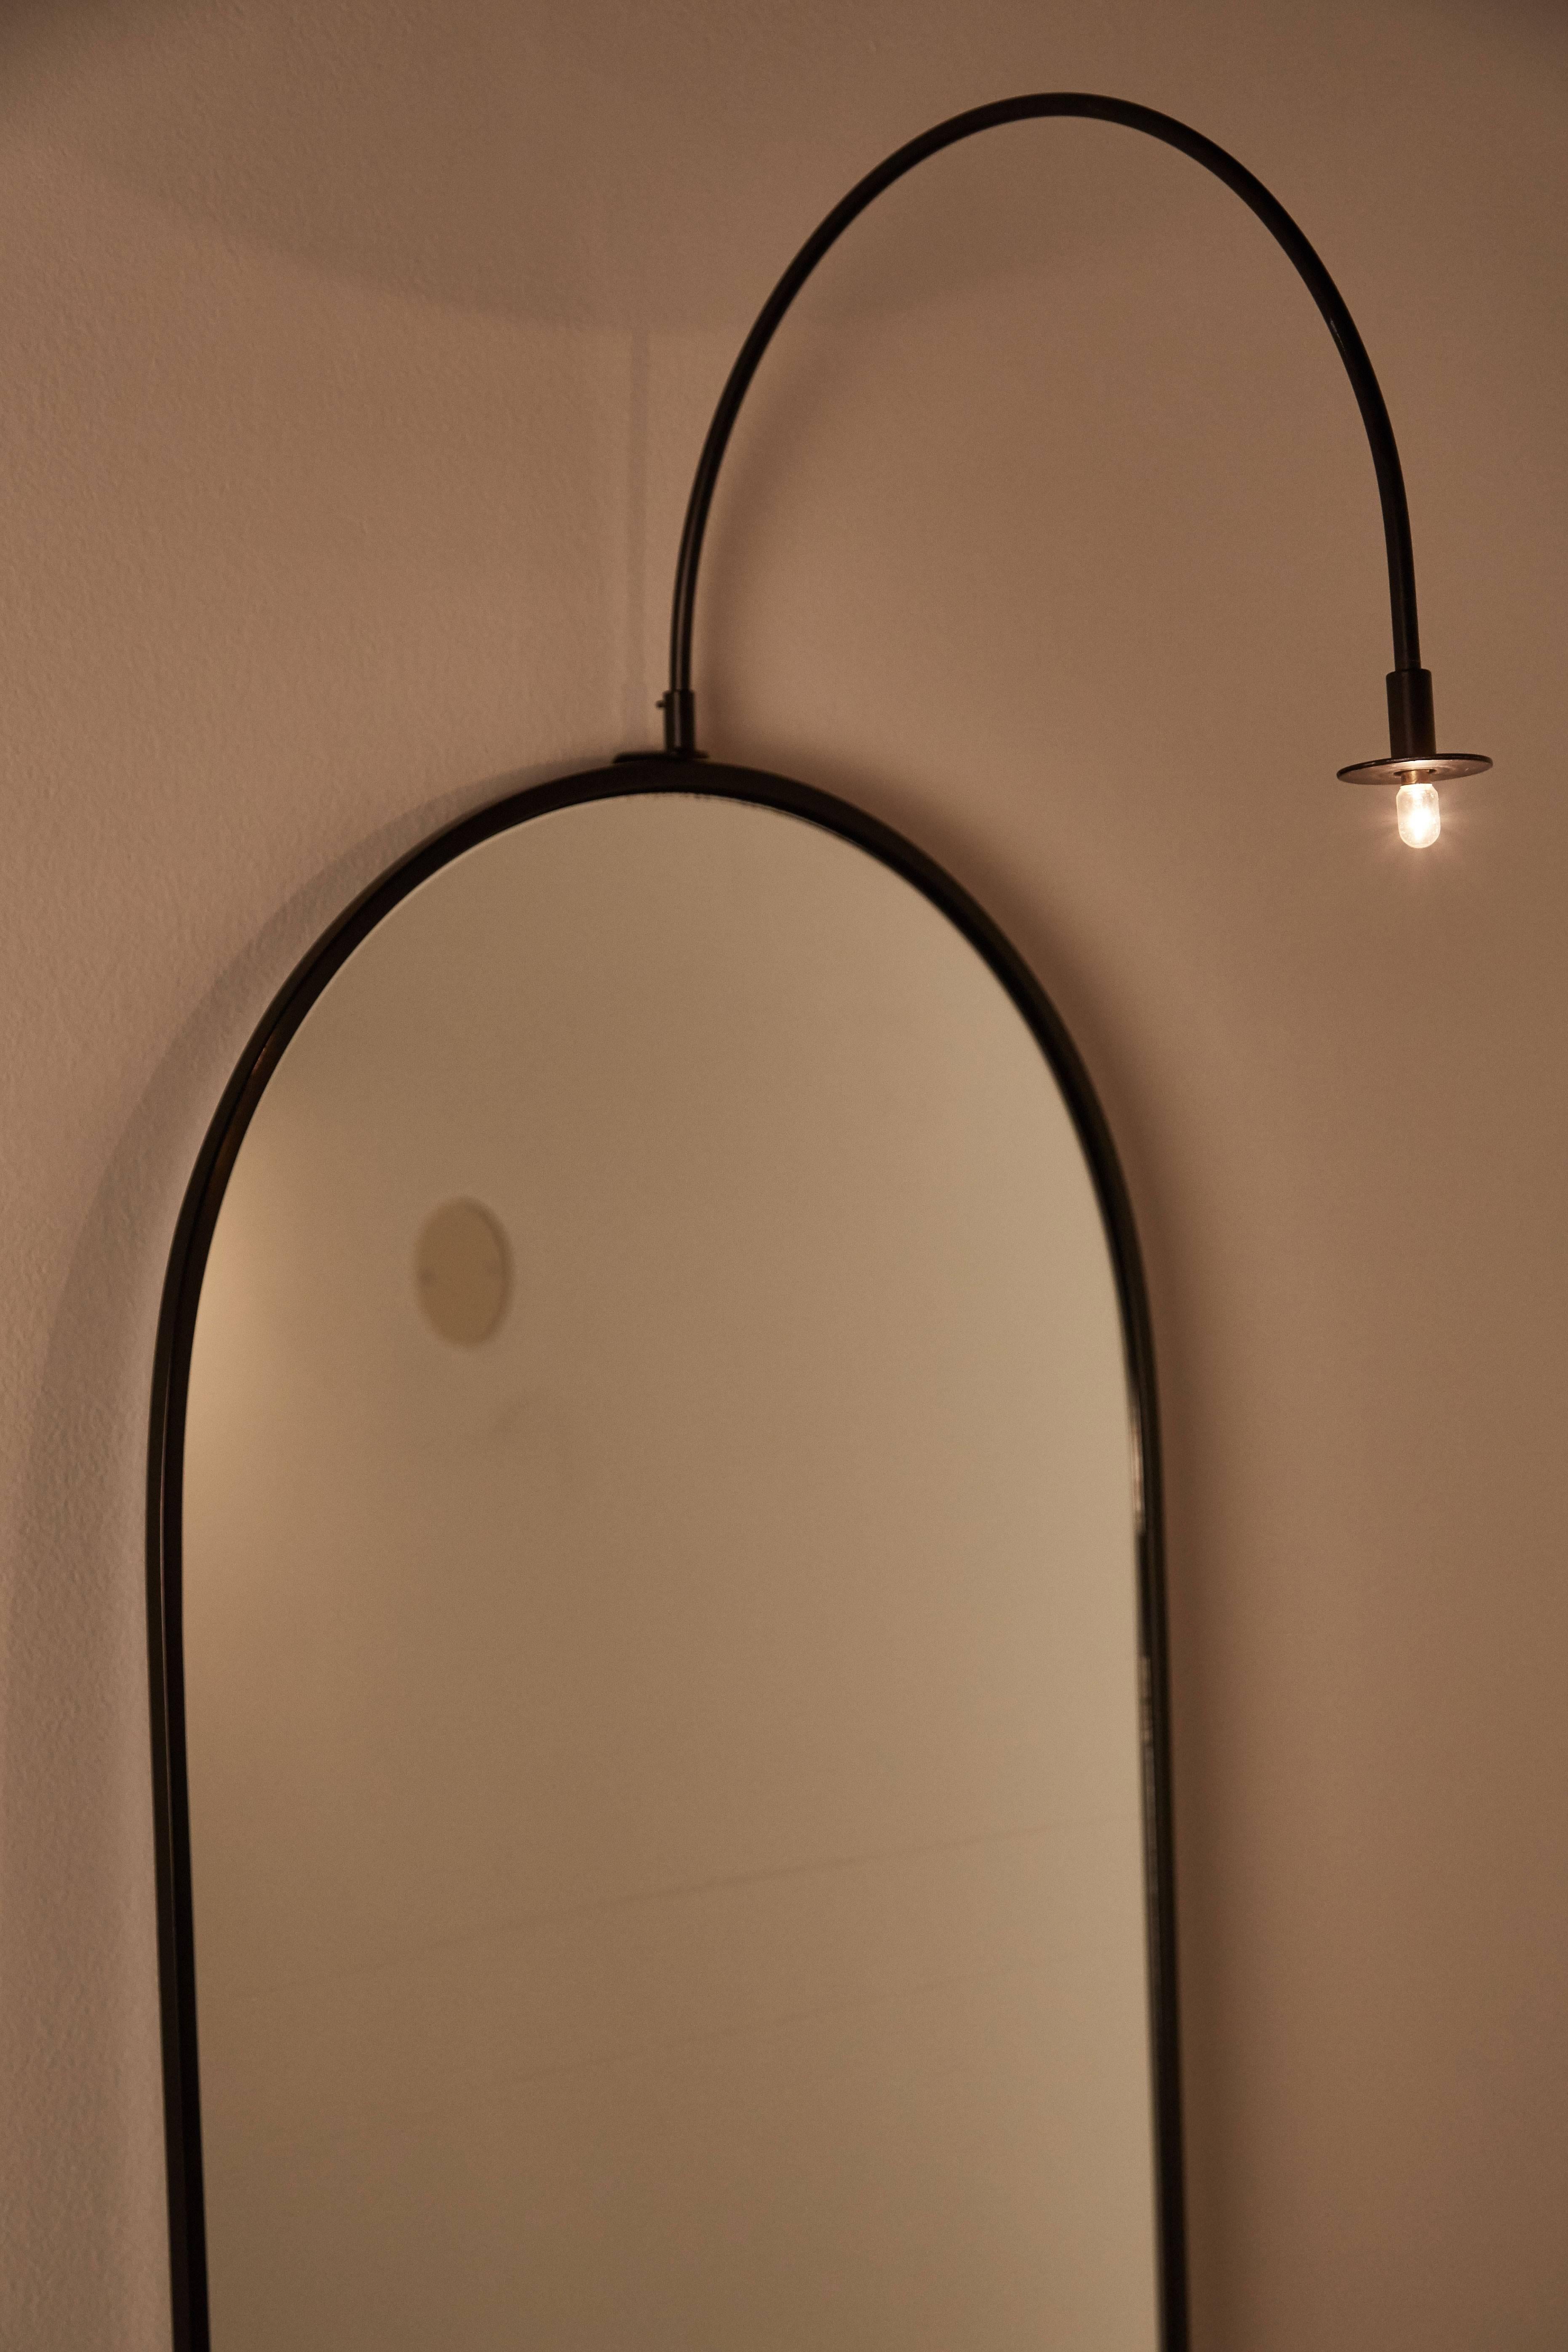 Illuminating mirror designed by Carlo Forcolini for Alias in Italy, 1982. Small switch located in the middle of fixture allows mirror to be illuminated. Glass and steel. Battery operated with one G9 halogen bulb.